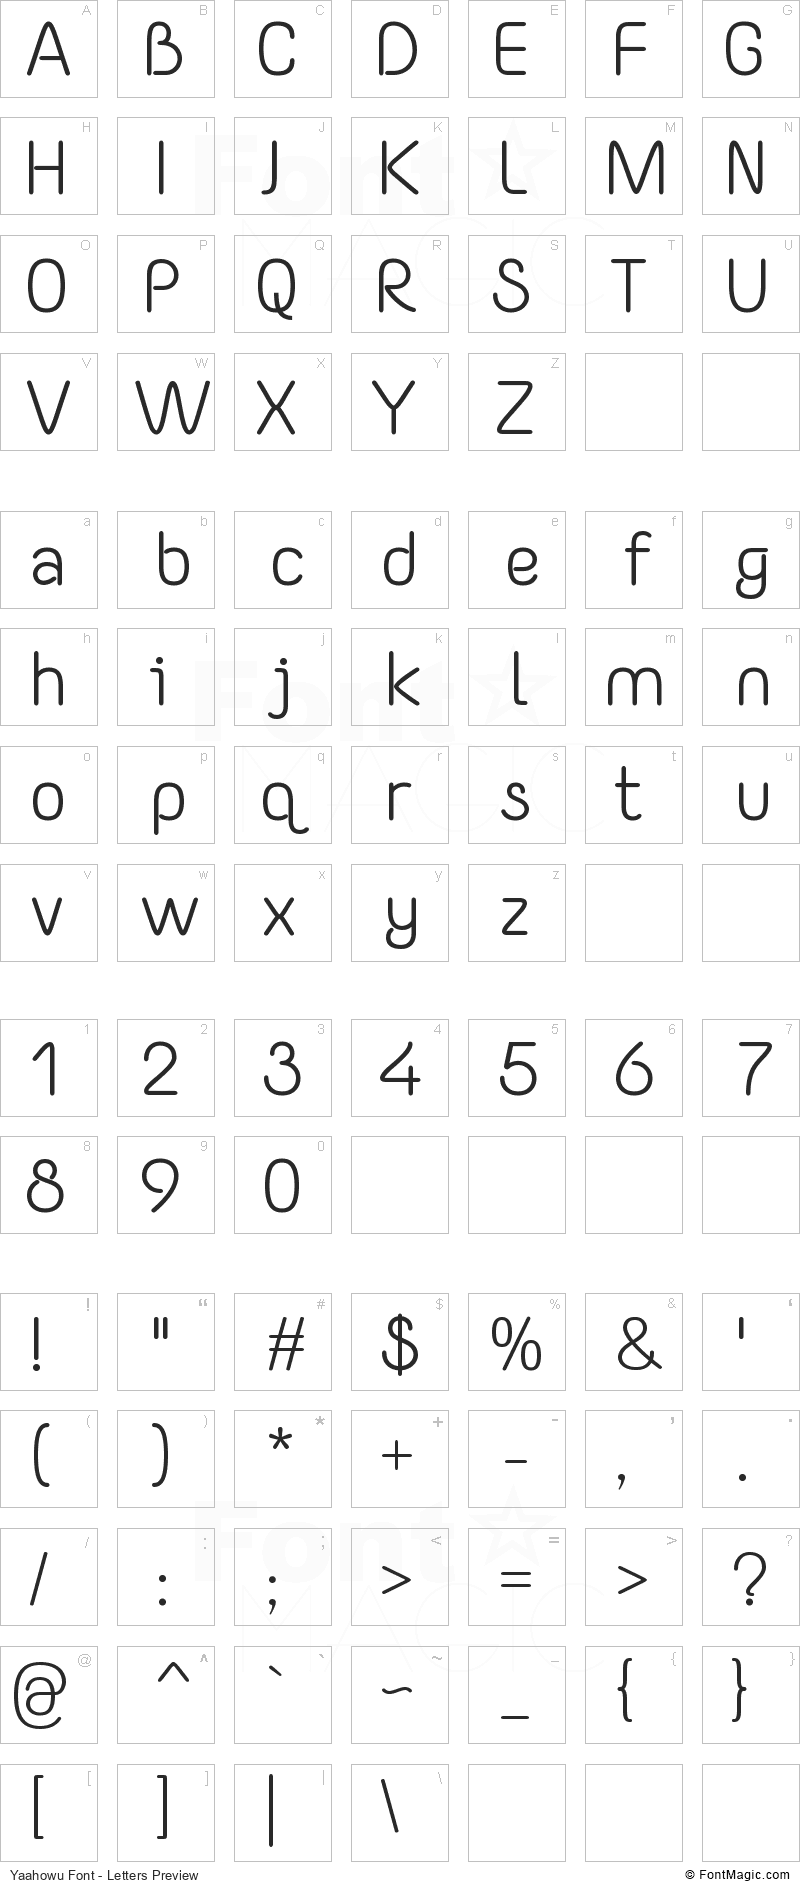 Yaahowu Font - All Latters Preview Chart